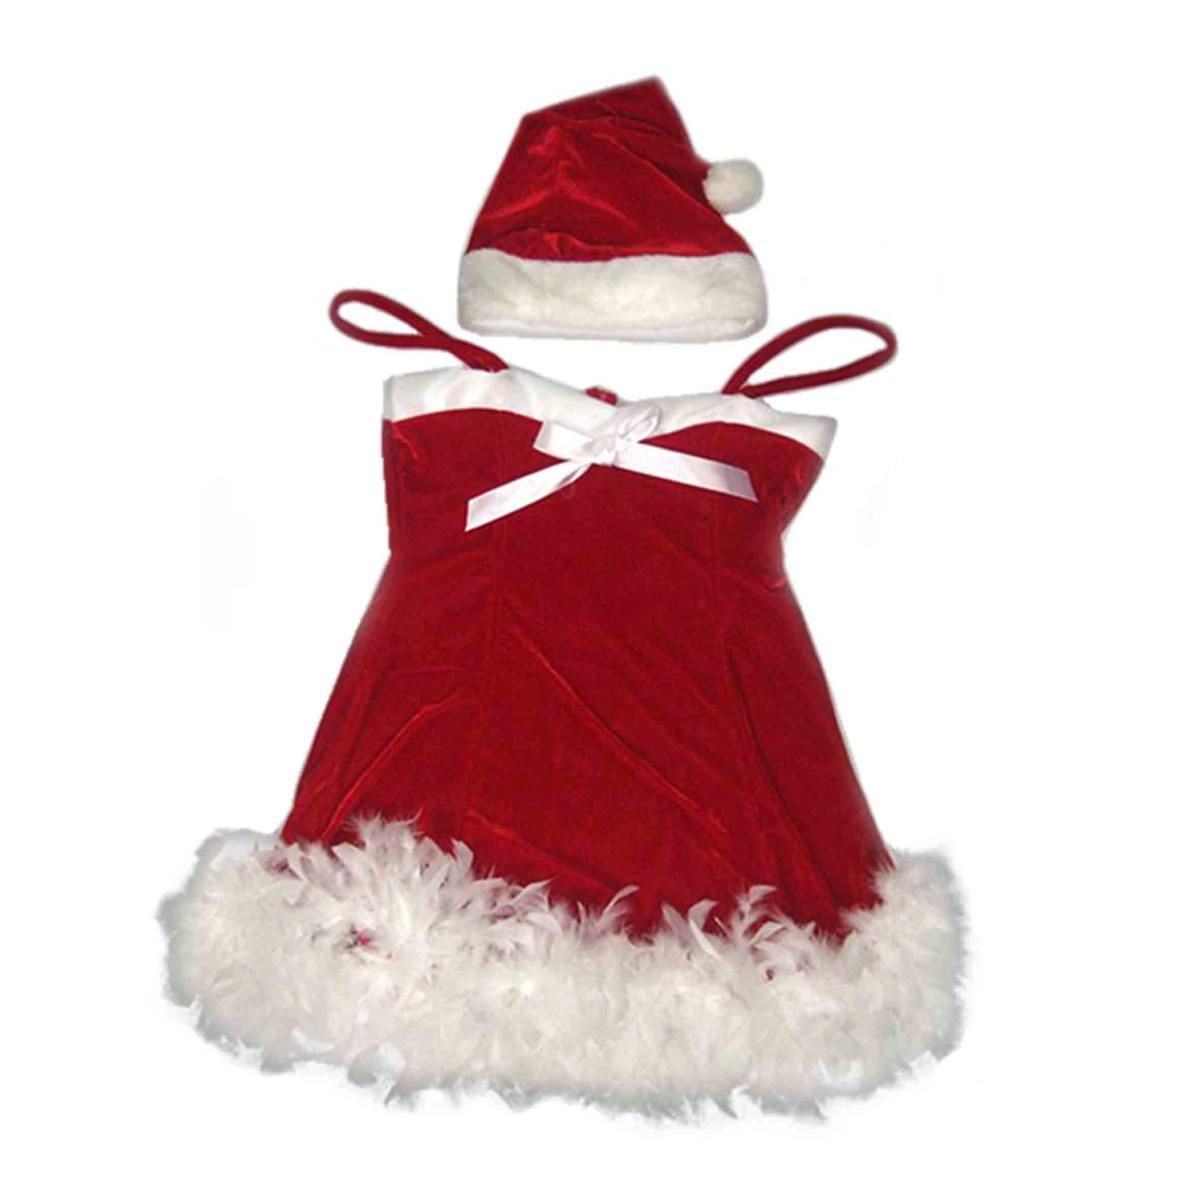 M2 Store Costume Babbo Natale Sexy GR-00564 8033113130564